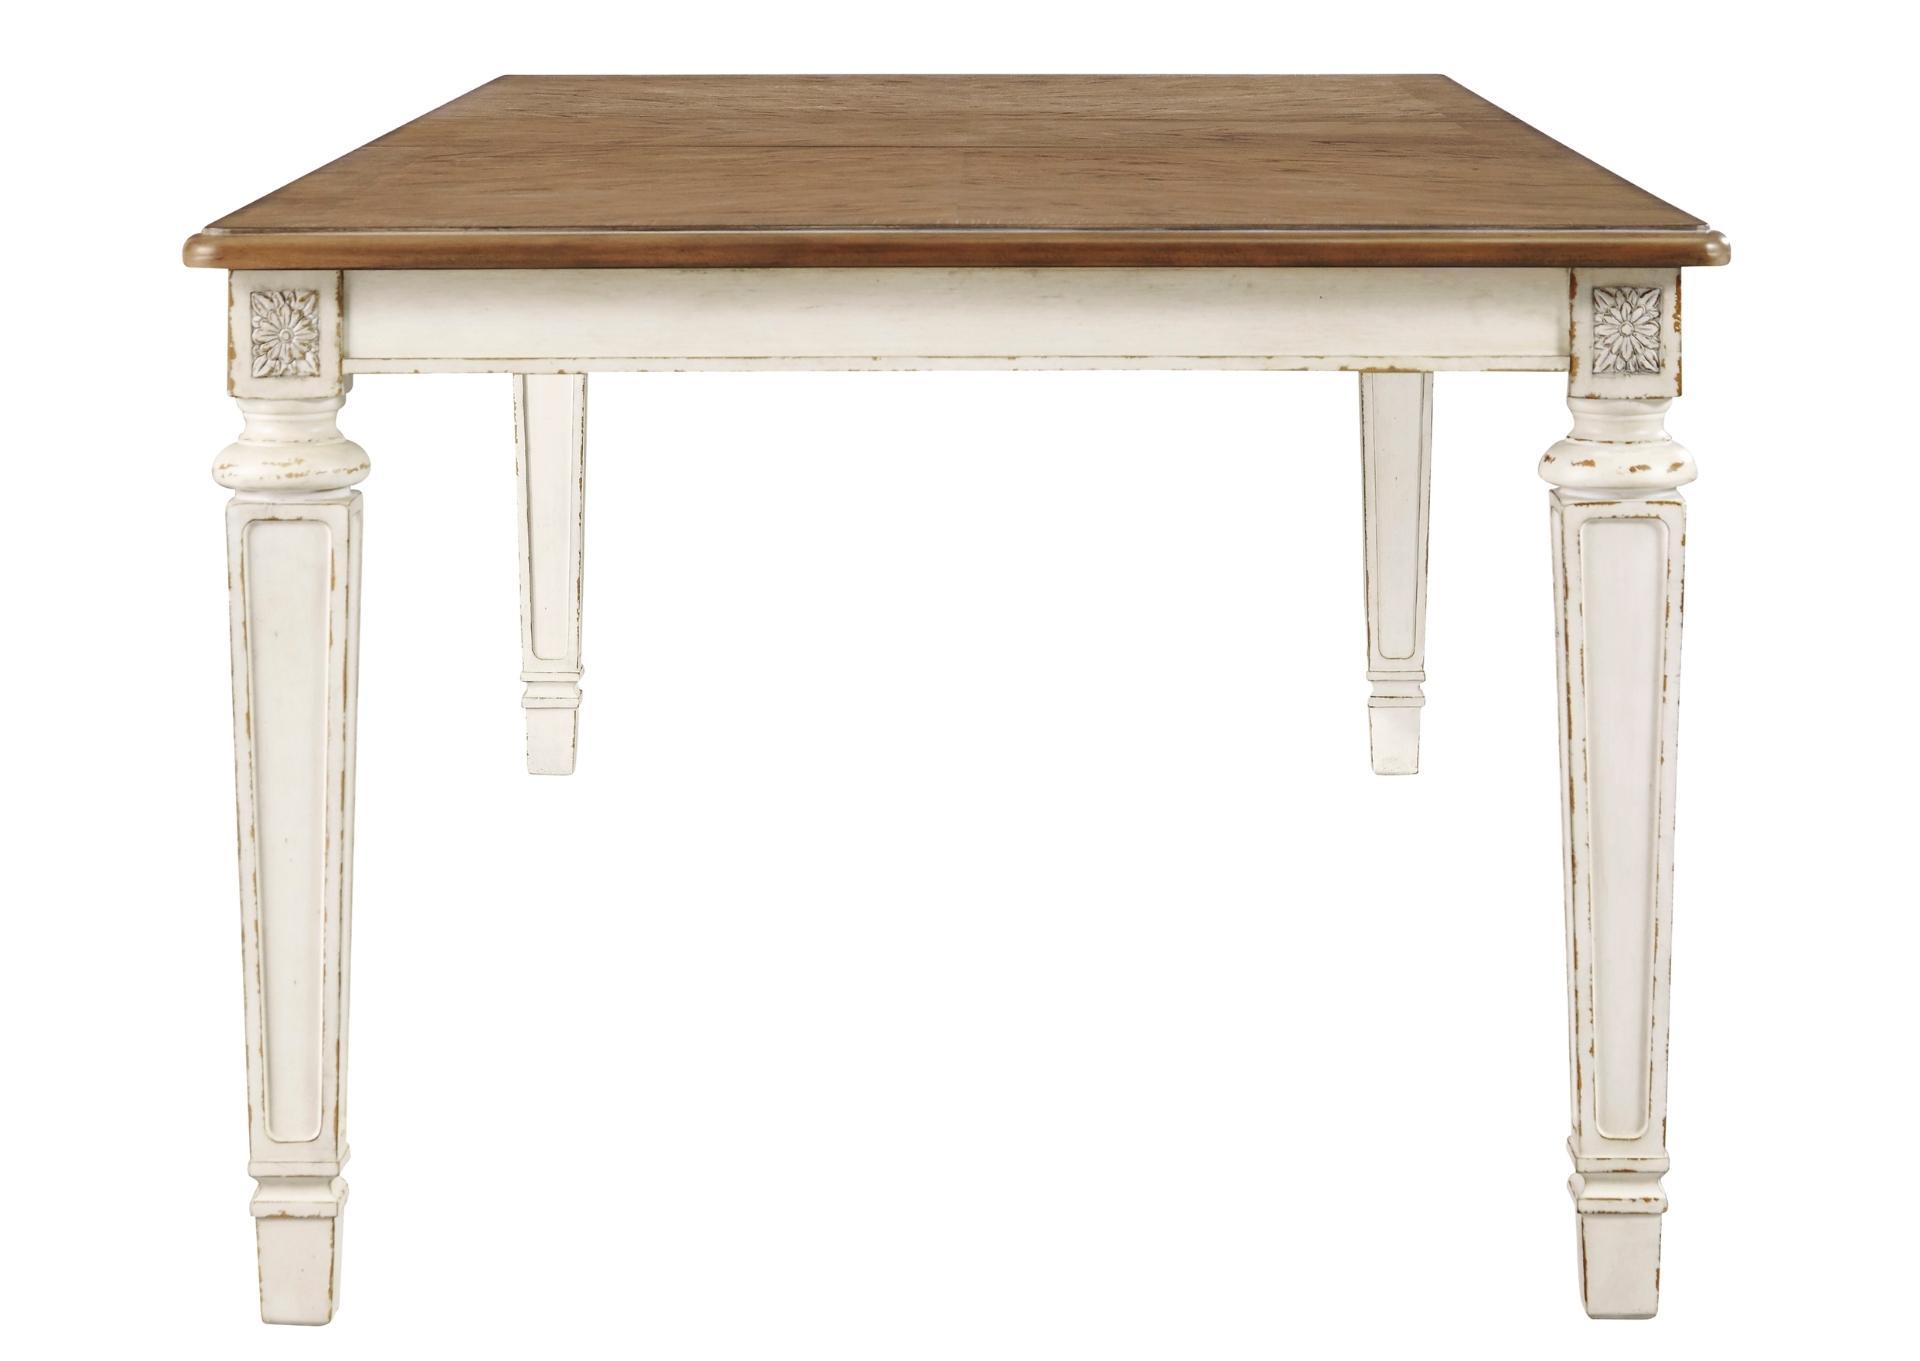 REALYN RECT DINING ROOM EXT TABLE,ASHLEY FURNITURE INC.